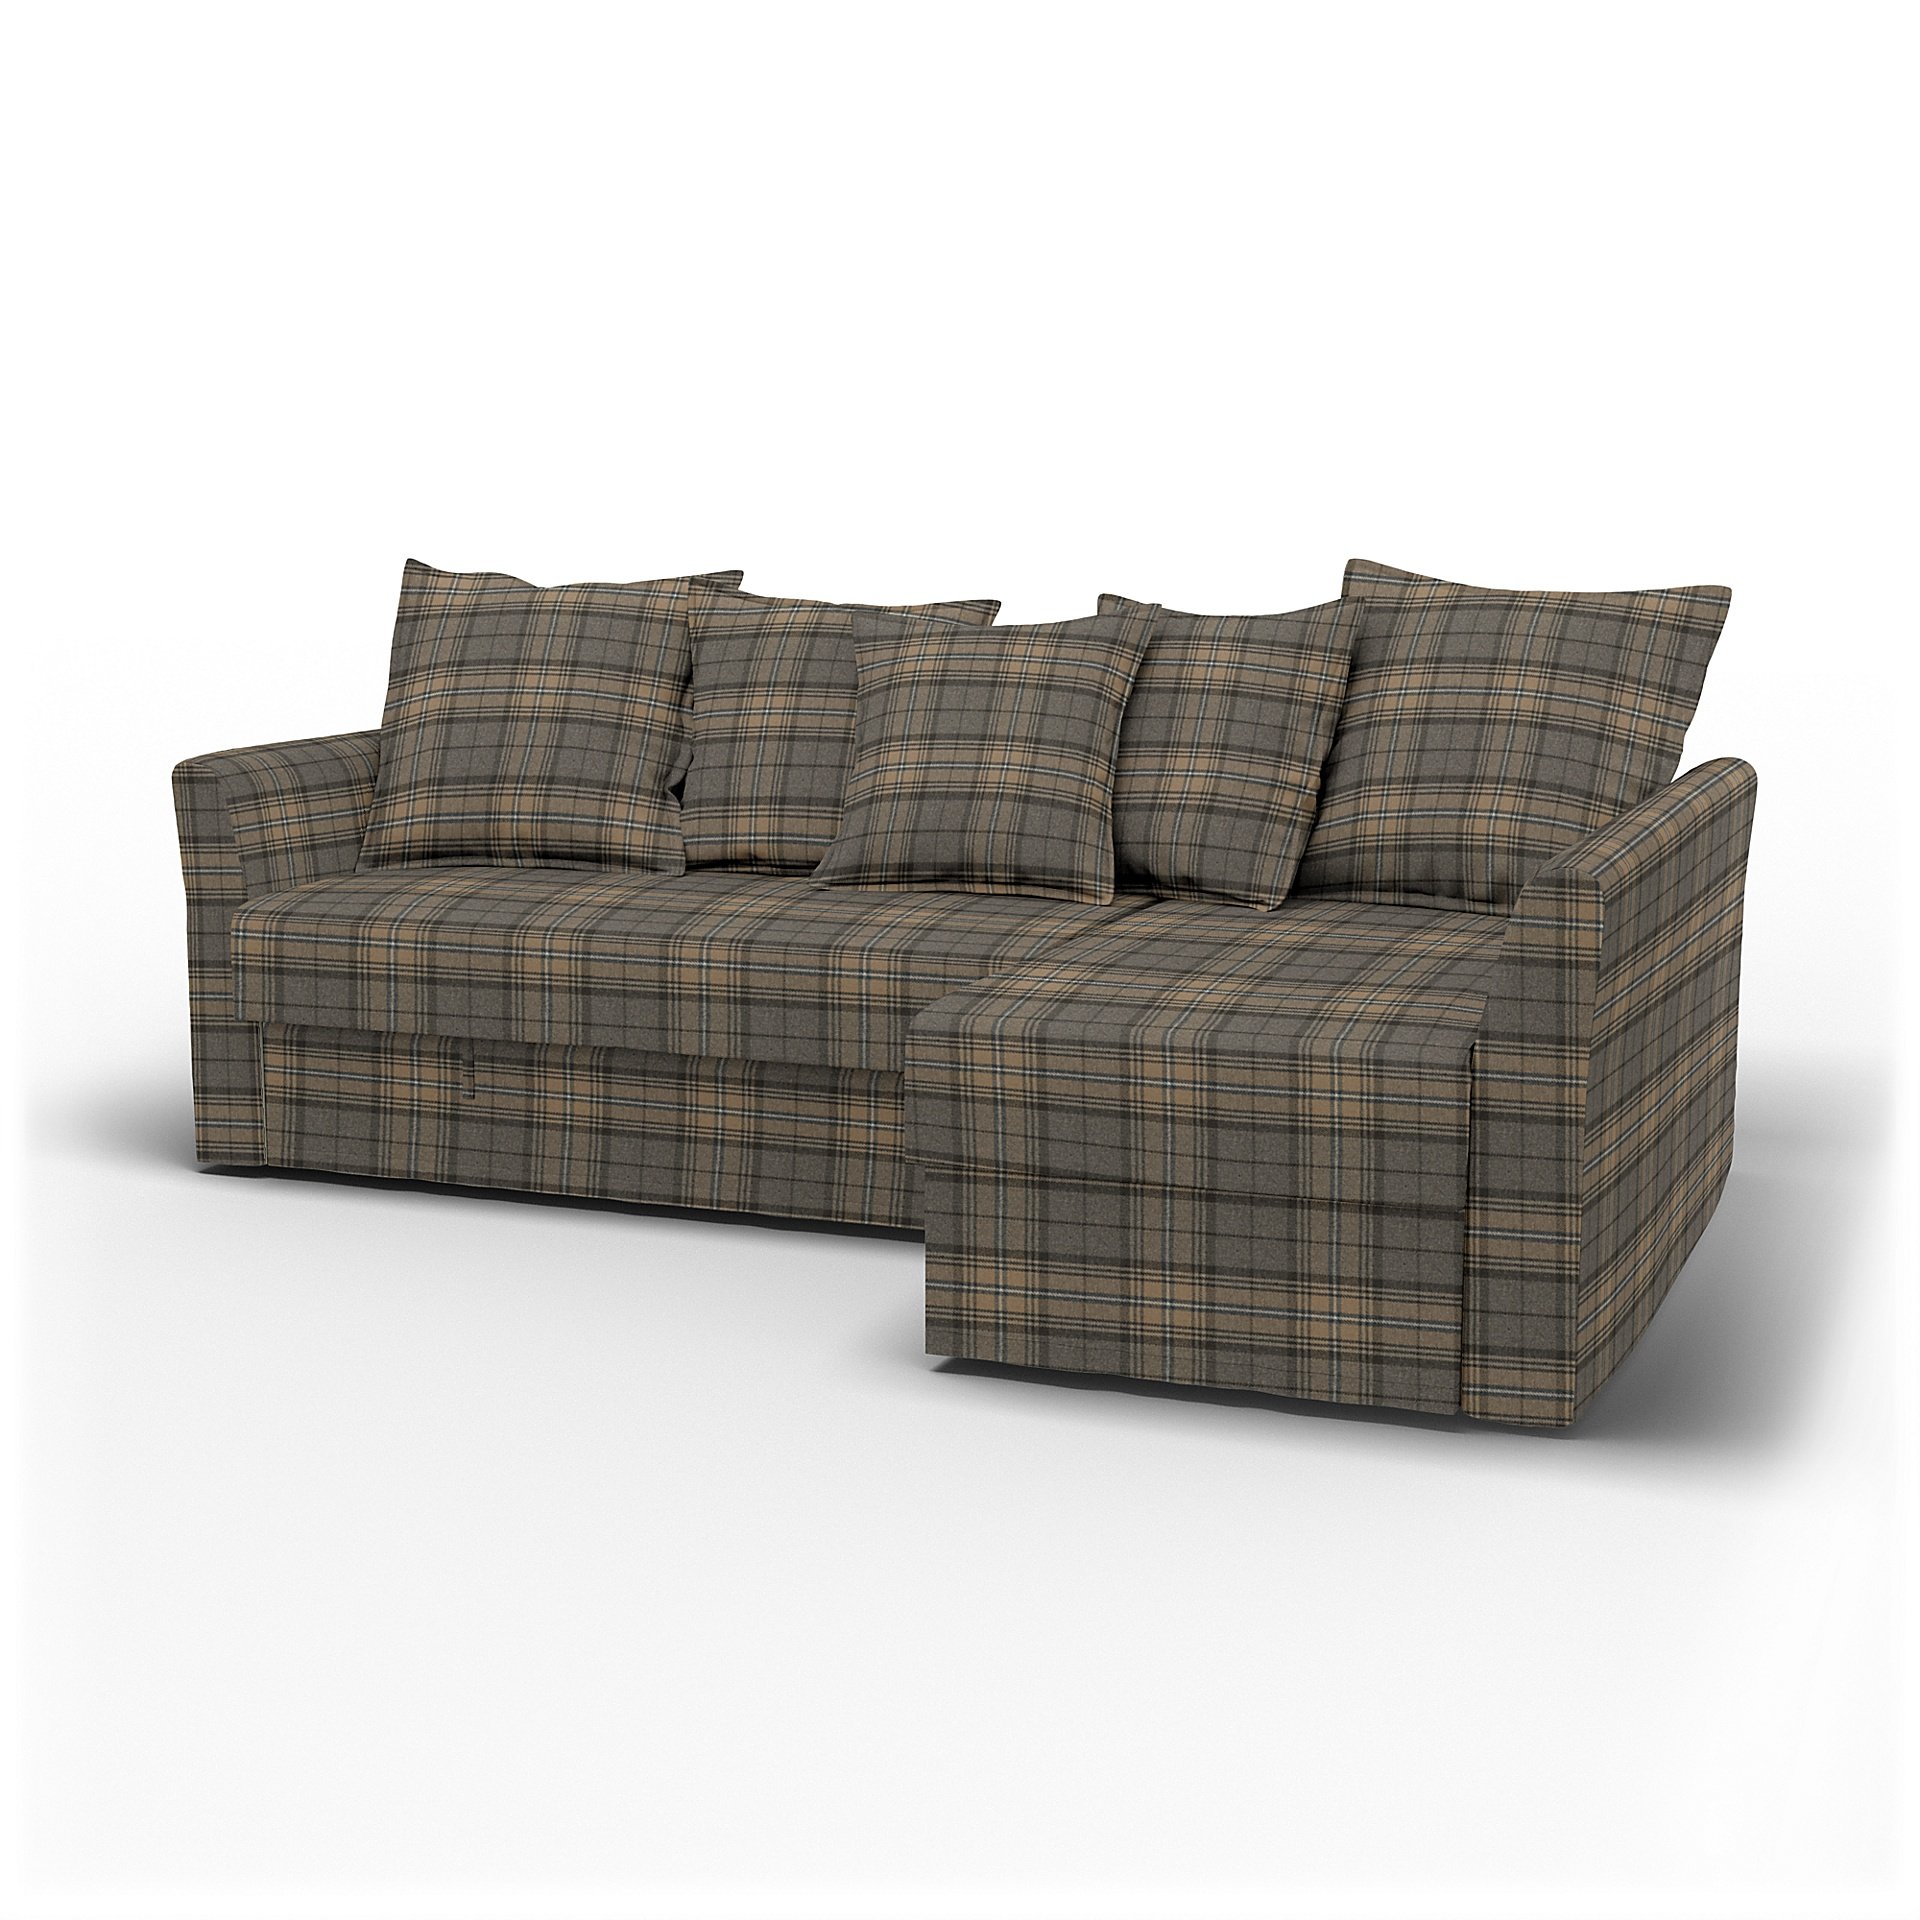 IKEA - Holmsund Sofabed with Chaiselongue, Bark Brown, Wool - Bemz